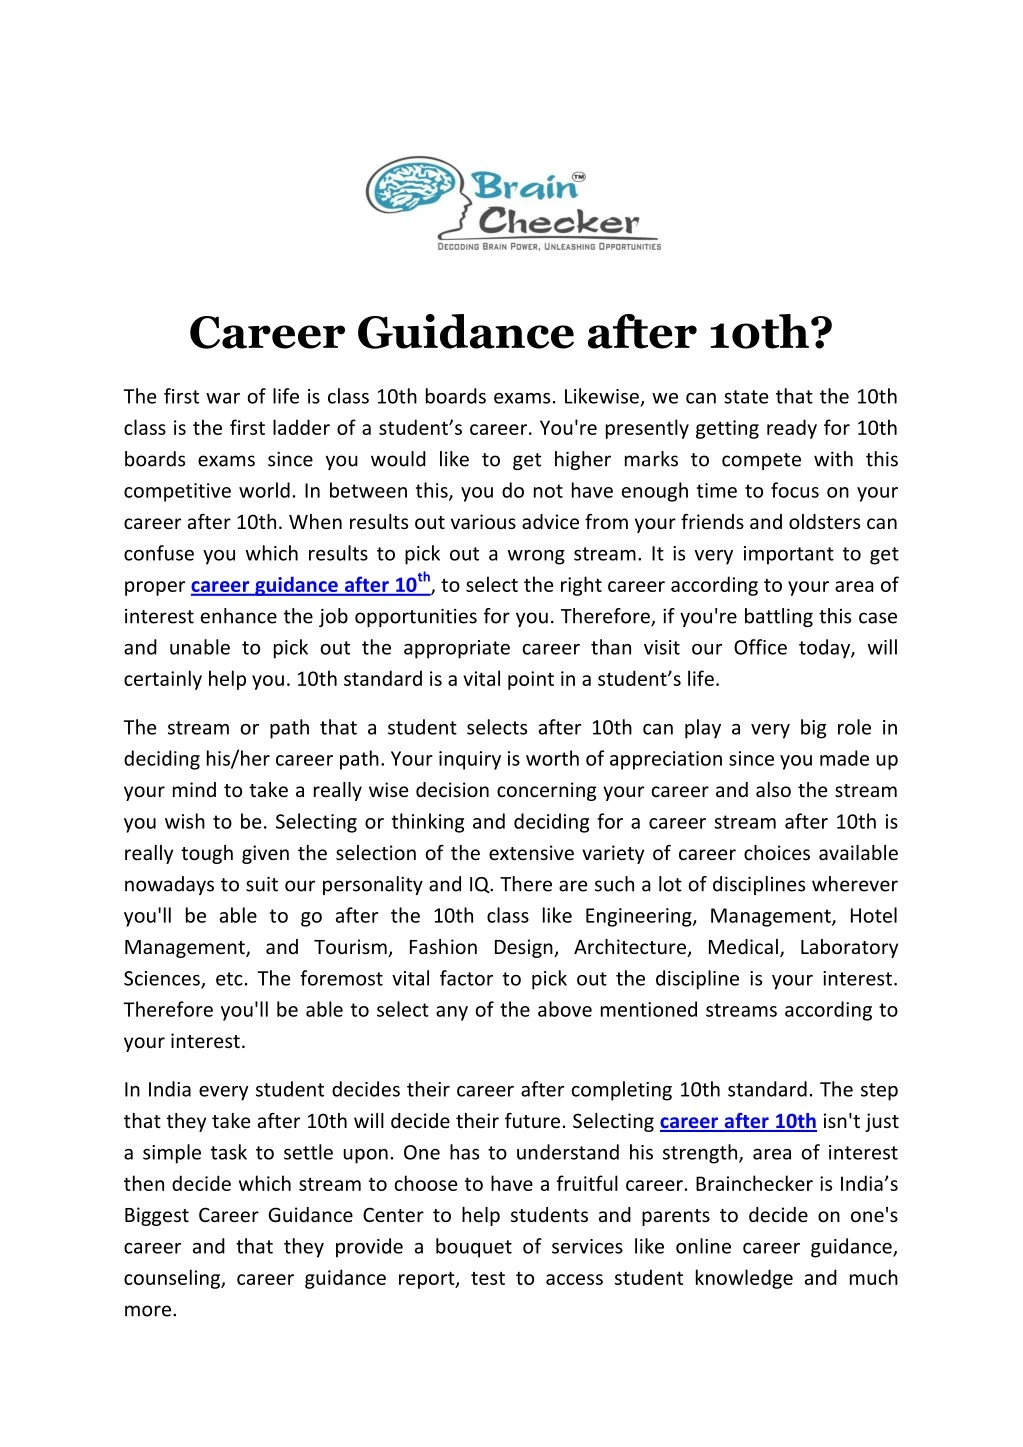 ppt-career-guidance-after-10th-powerpoint-presentation-free-download-id-7956843